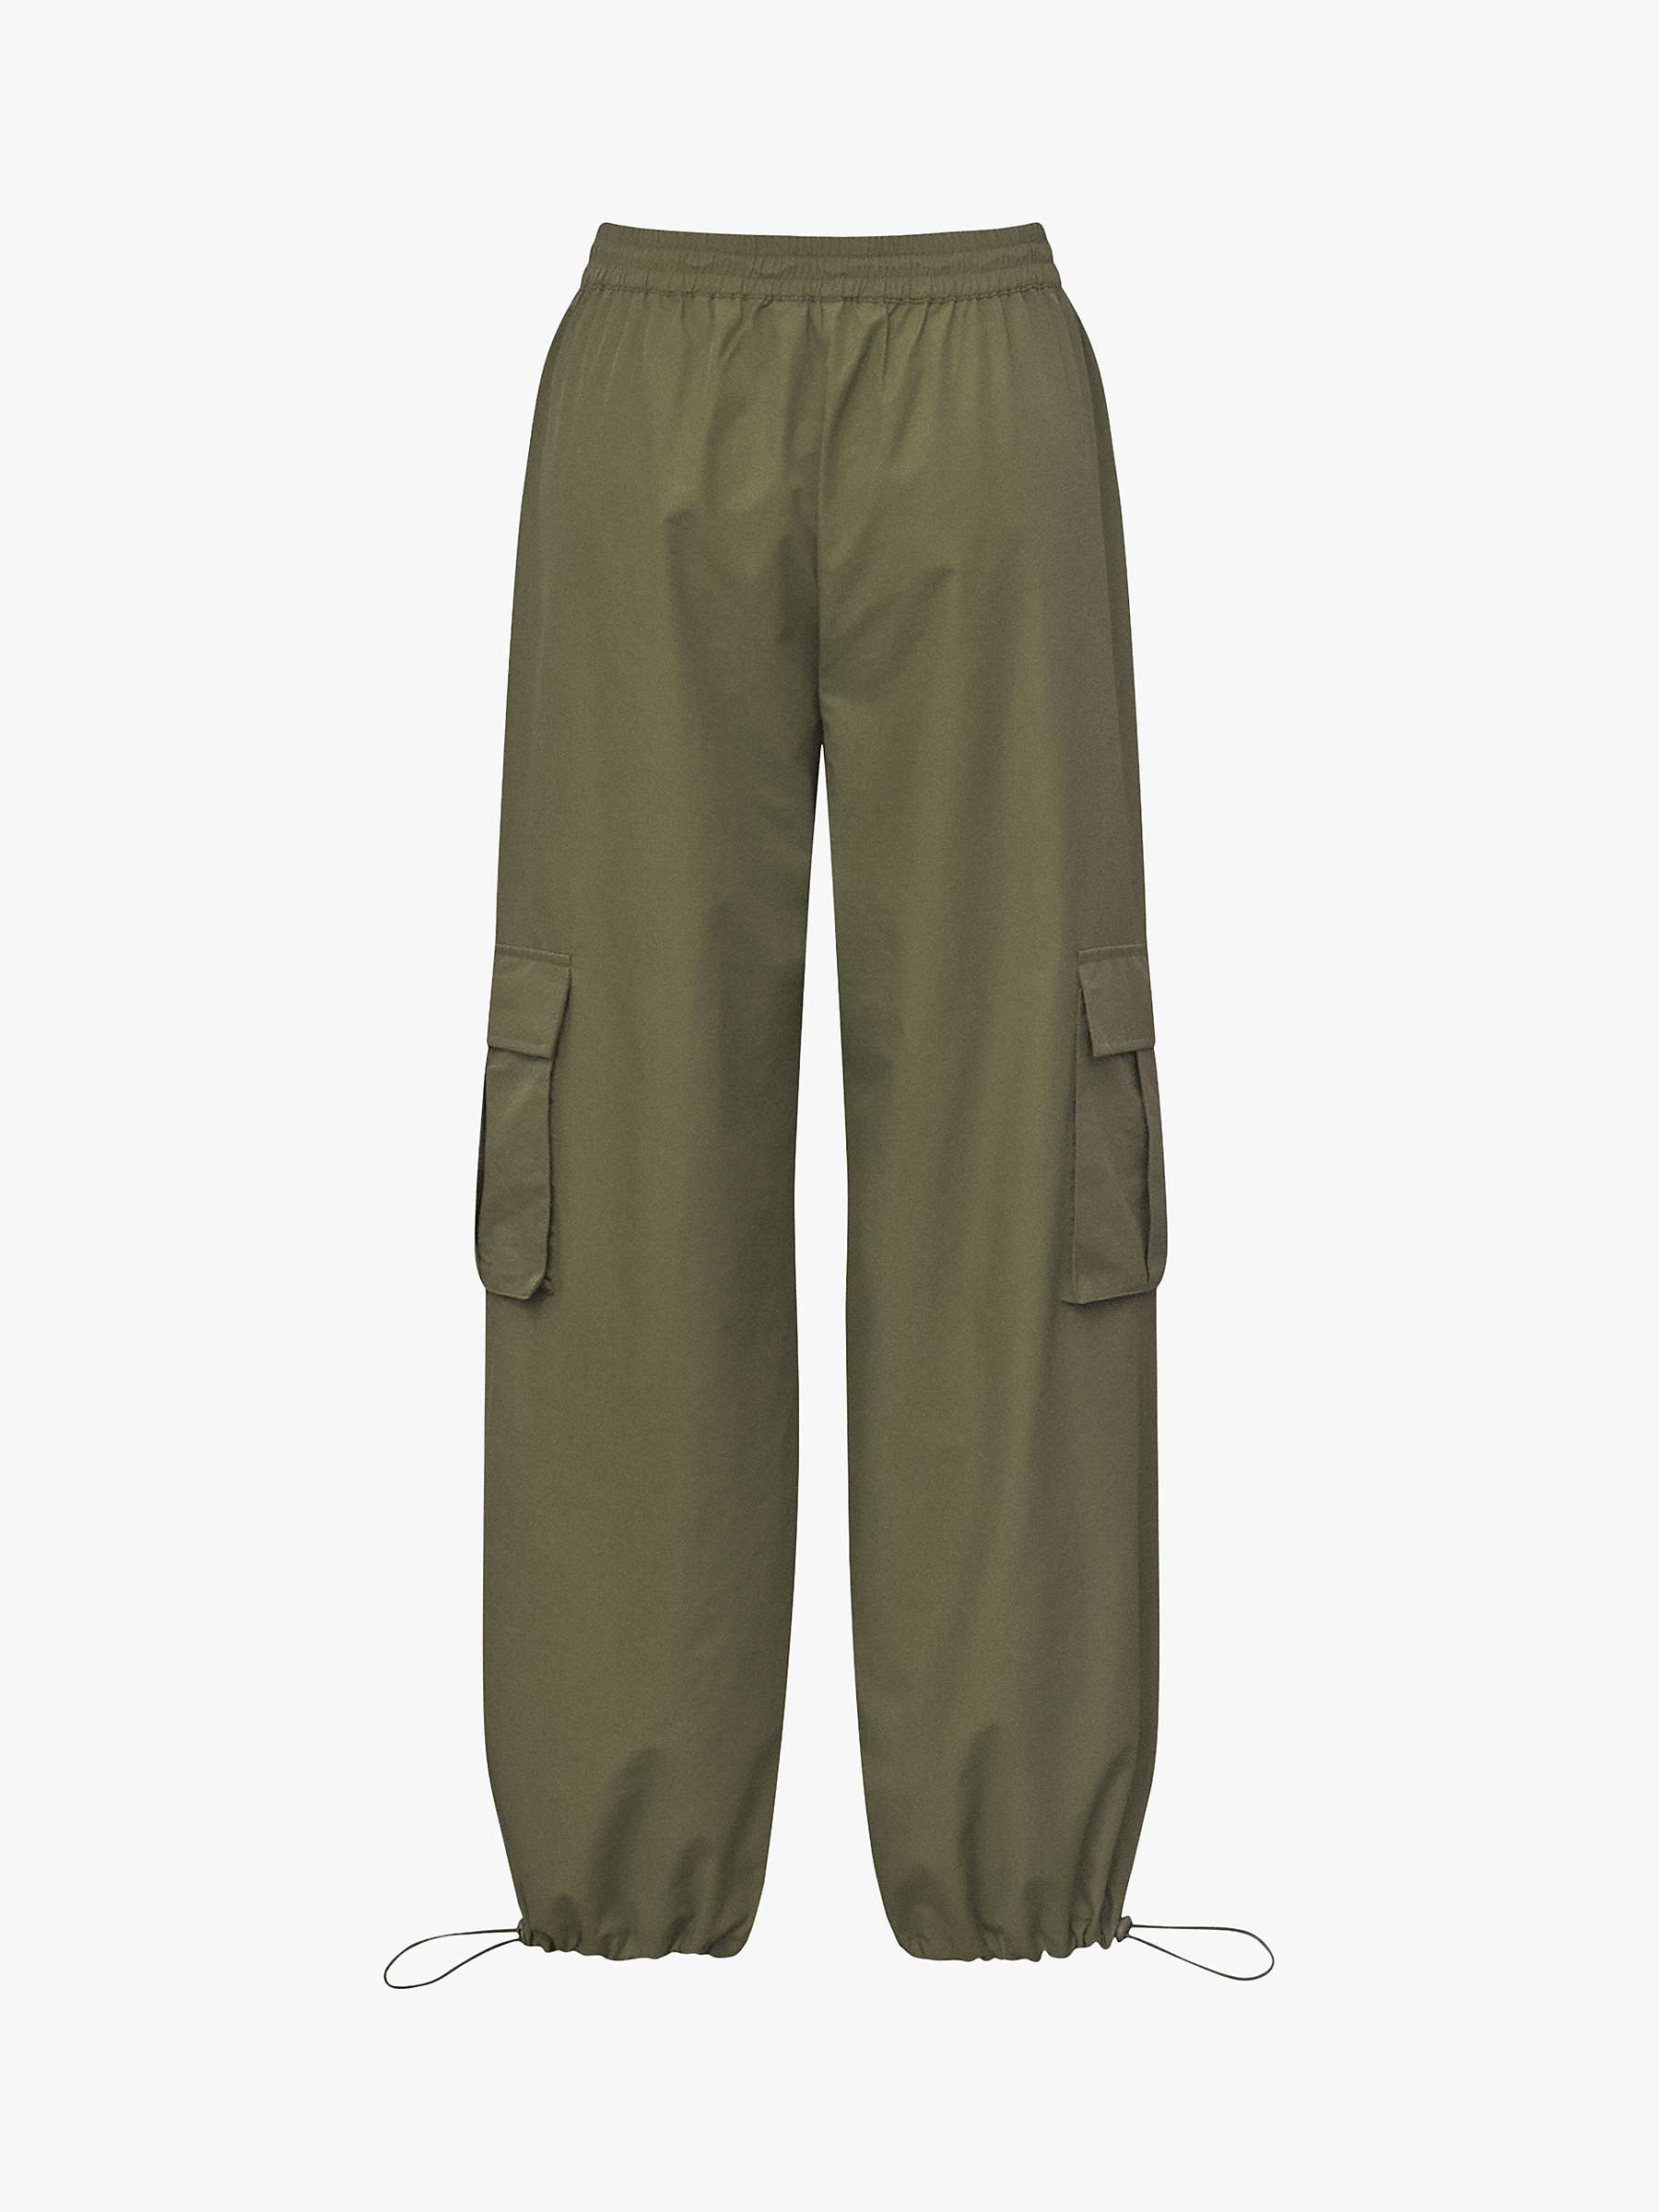 Buy A-VIEW Cargo Loose Fit Trousers, Army Online at johnlewis.com